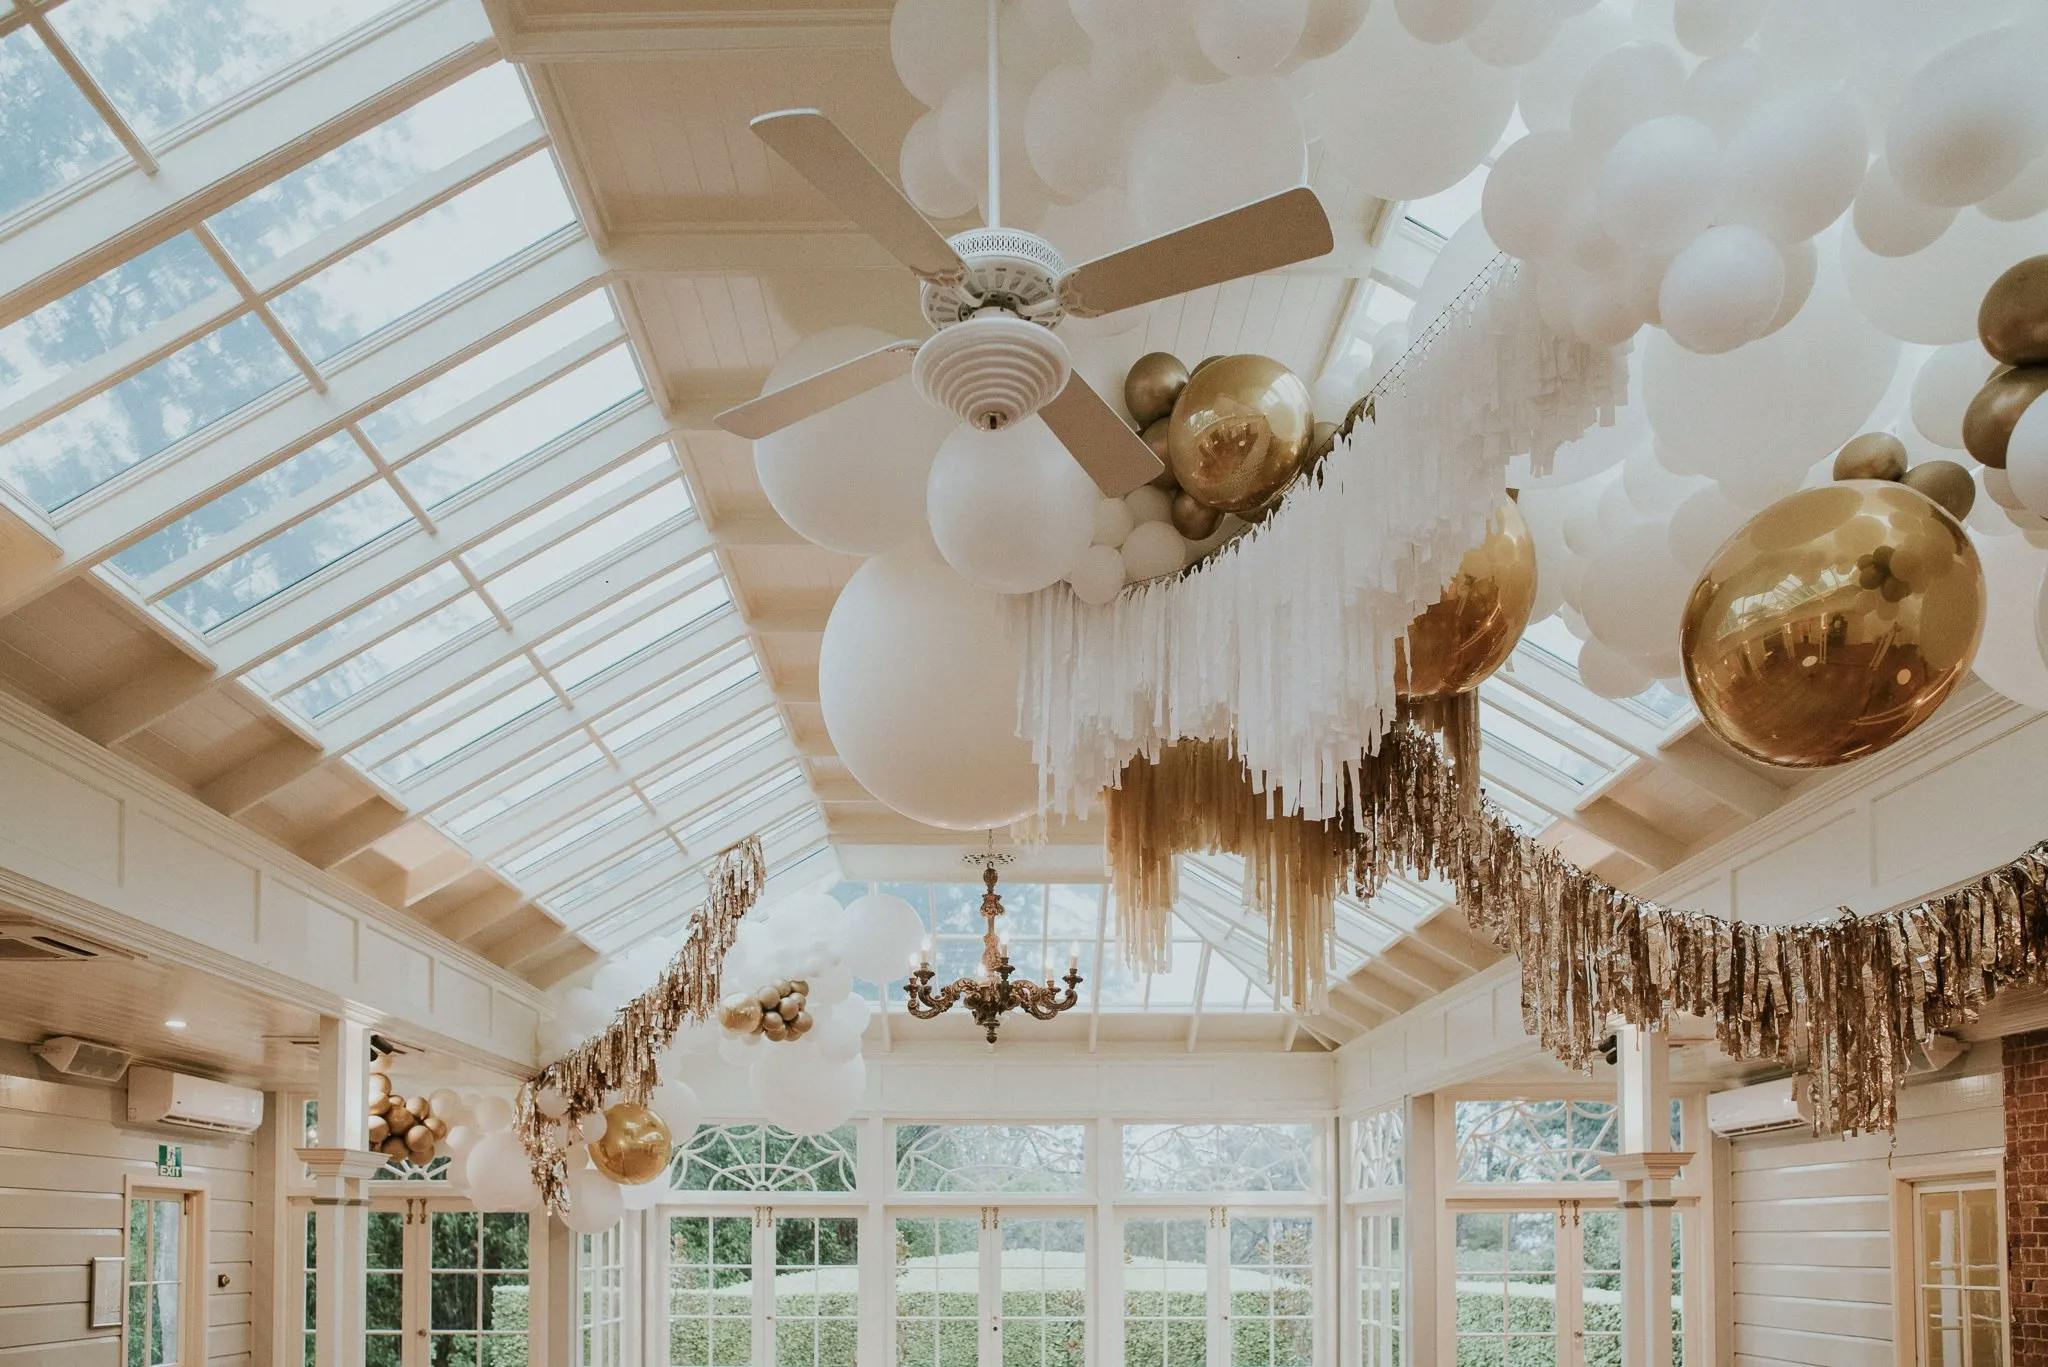 An elegant room with a high glass ceiling decorated with large white and gold balloons, white tassels, and gold garlands. The room is bright and airy, with chandeliers hanging from the ceiling, and large windows that let in natural light.